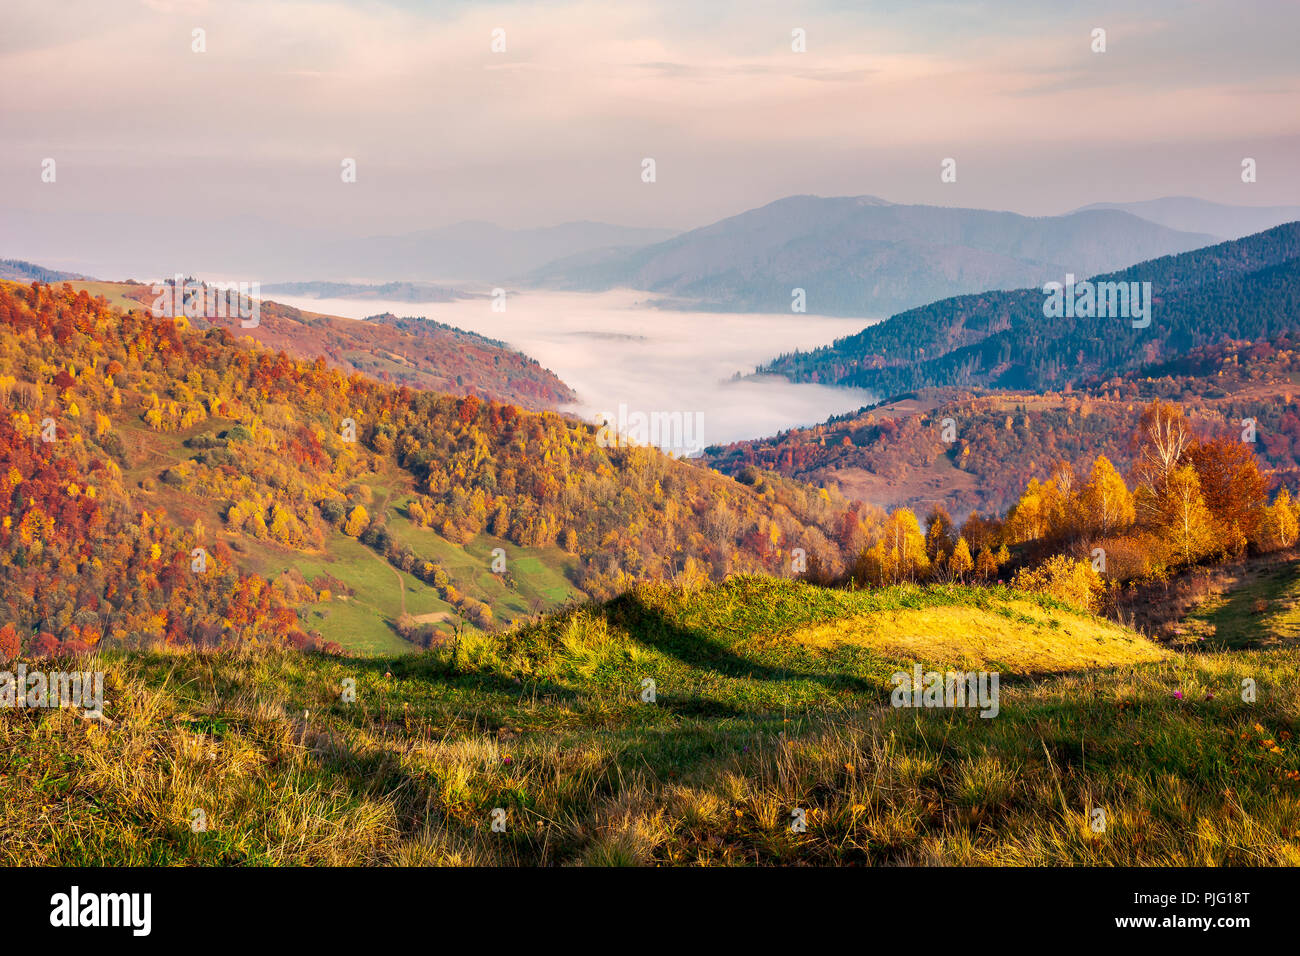 beautiful landscape at foggy autumn sunrise. red foliage on forested hills. cloud inversion in distant valley. beautiful season colors Stock Photo